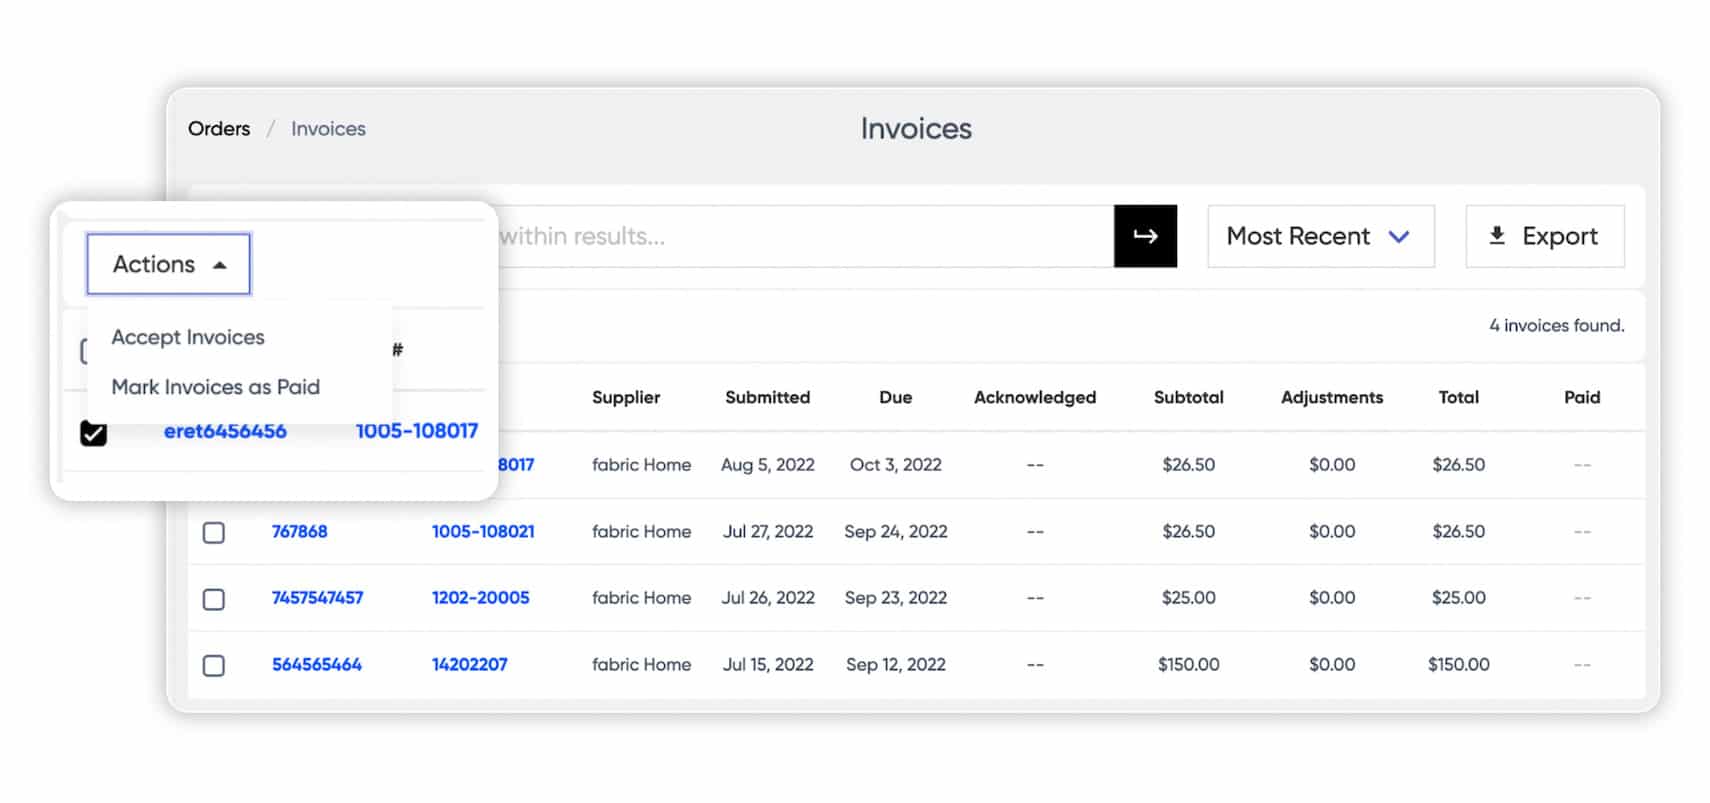 With our August product update, it's easier than ever to manage vendor invoices.